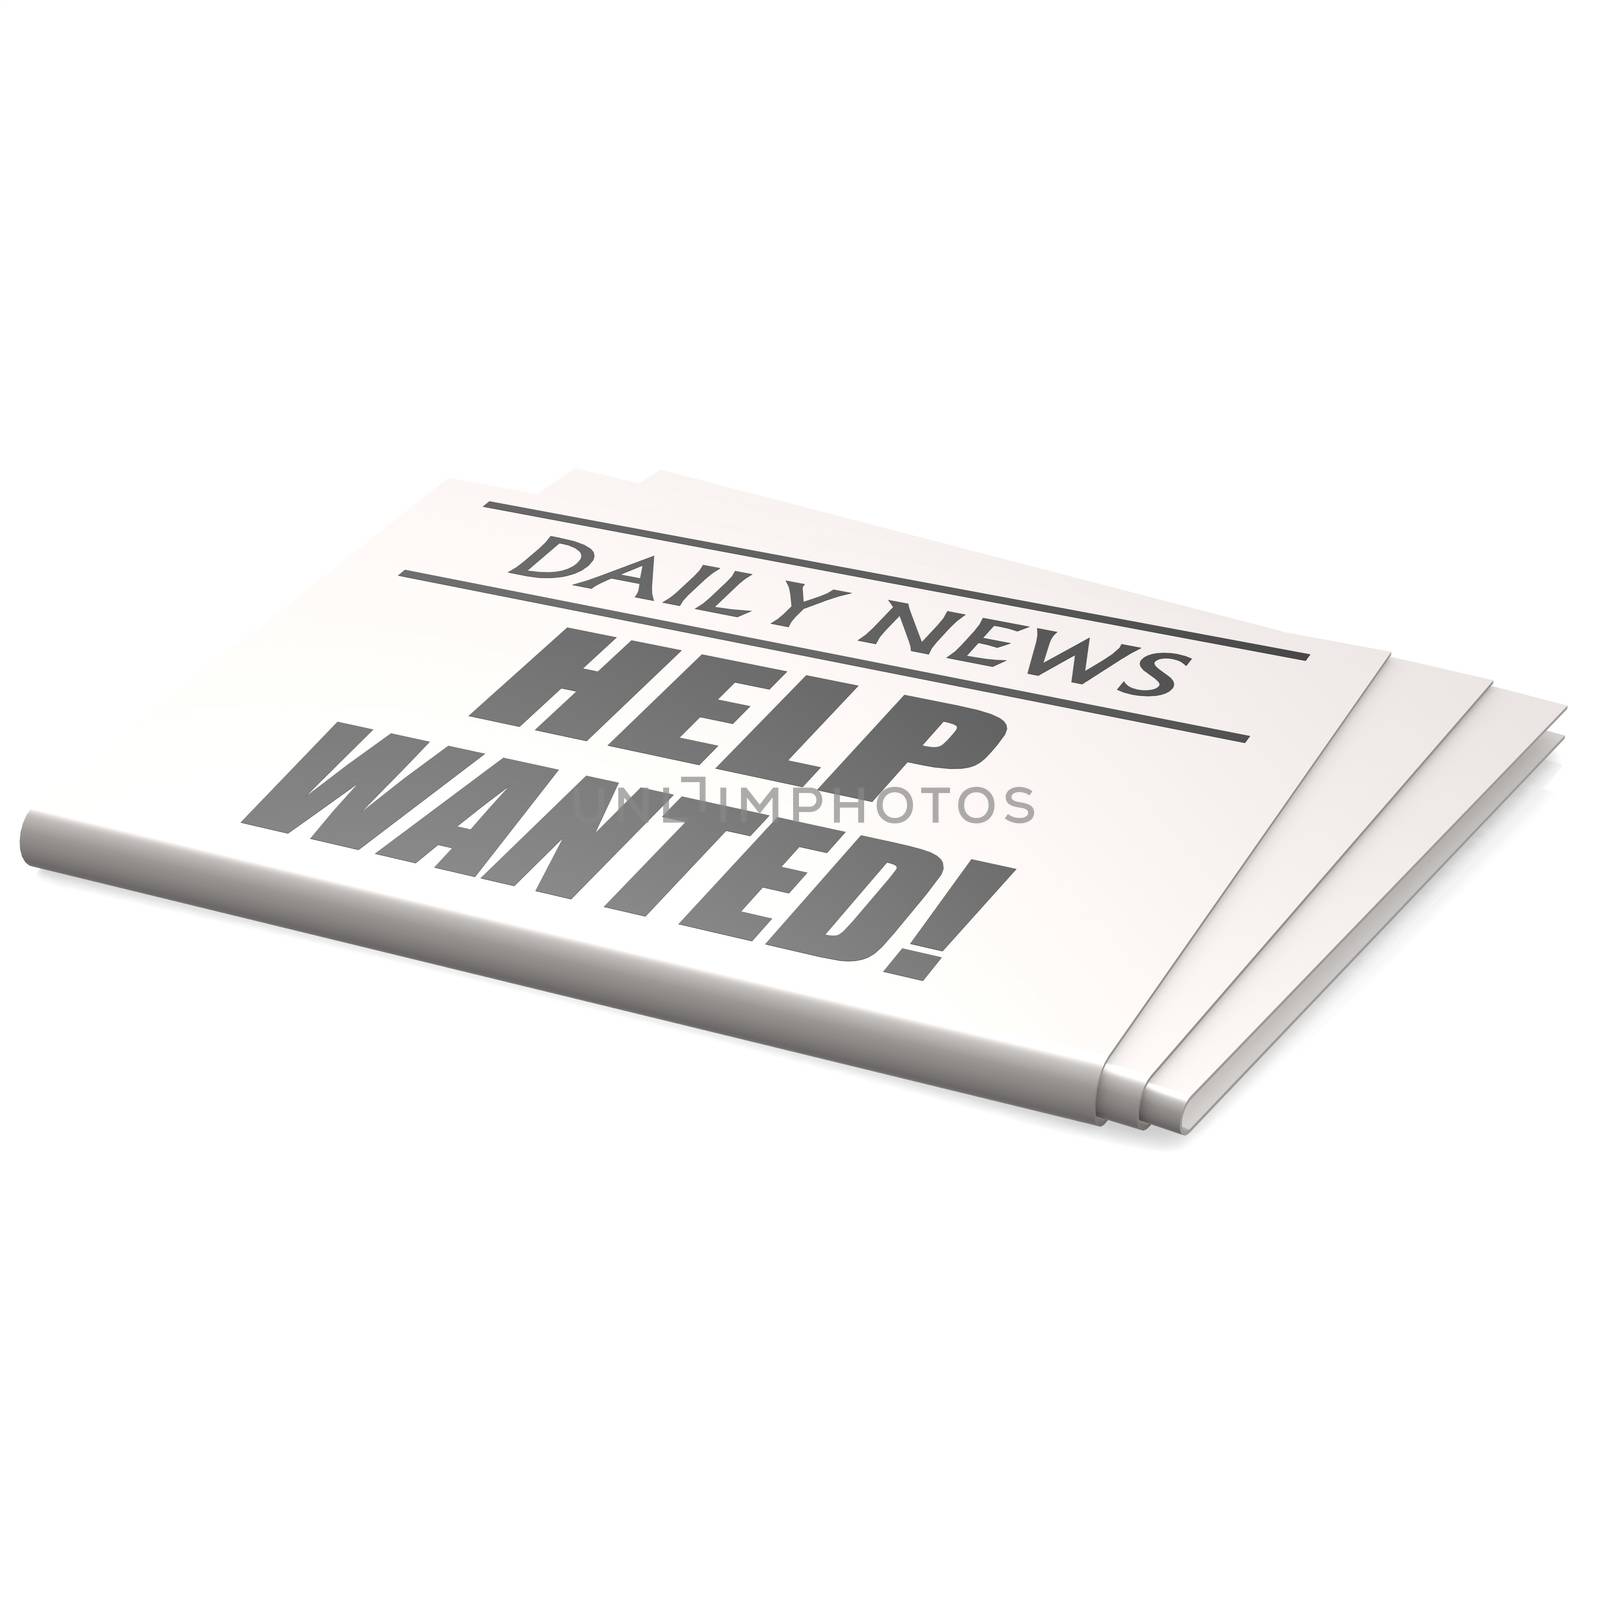 Newspaper help wanted by tang90246